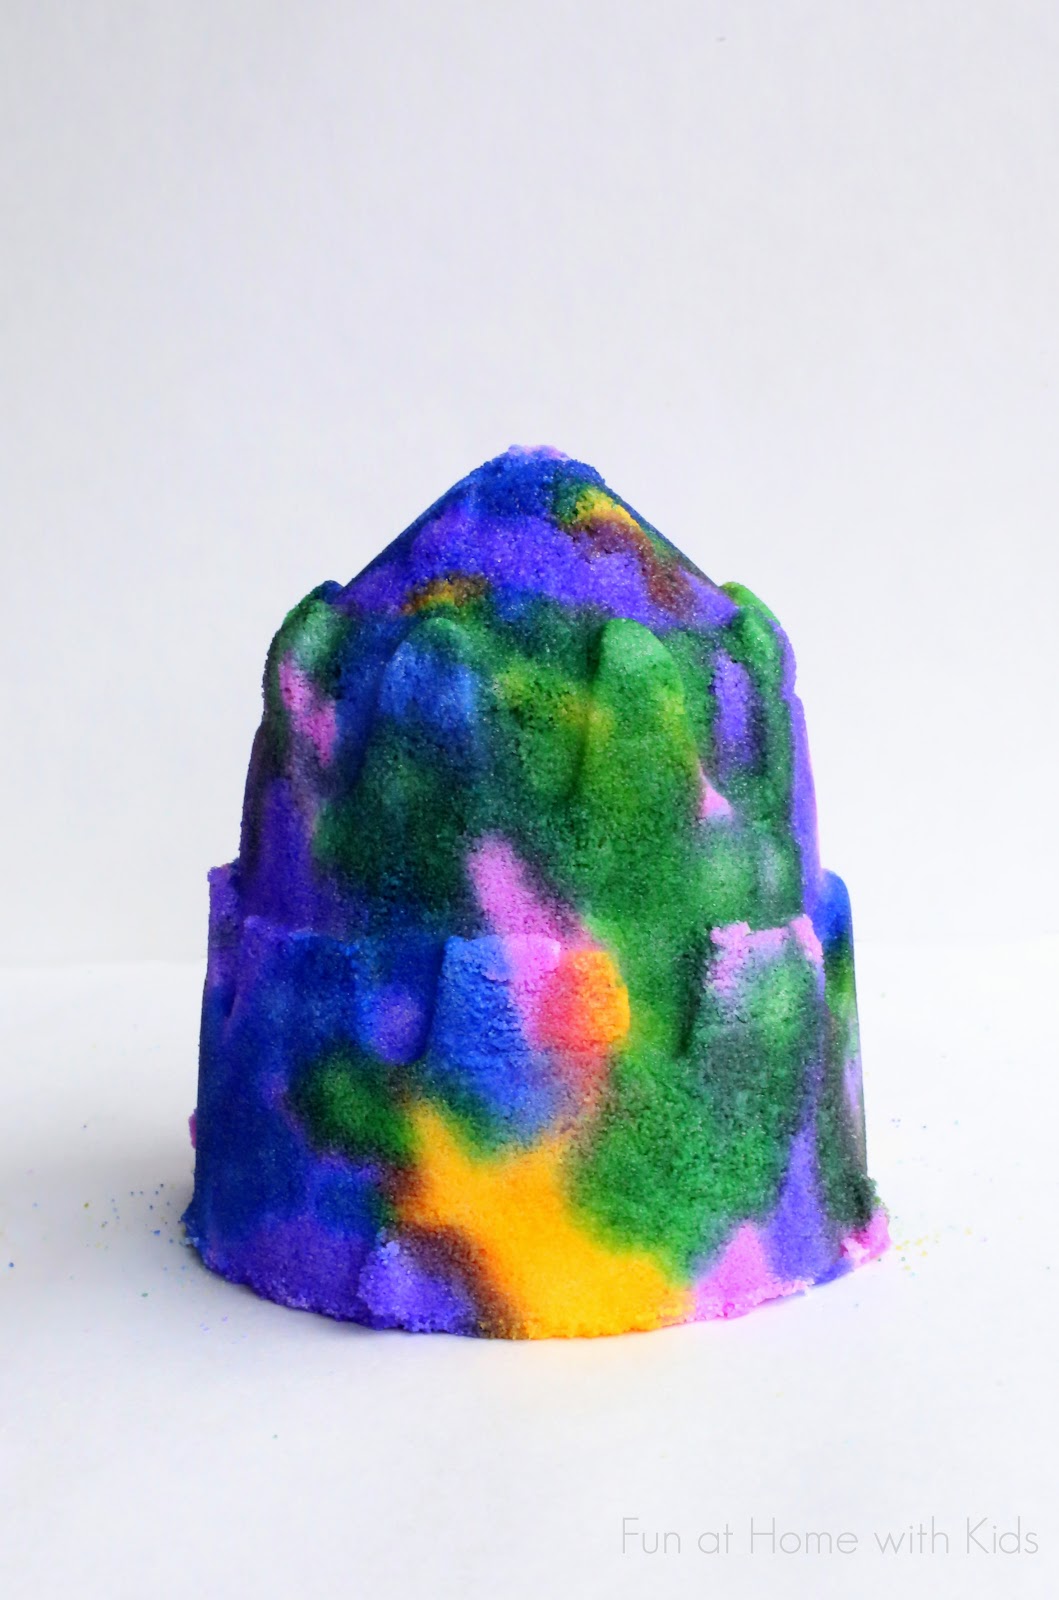 Painted Salt Sculptures - a NEW recipe and activity from Fun at Home with Kids - fun for all ages from toddler on up!